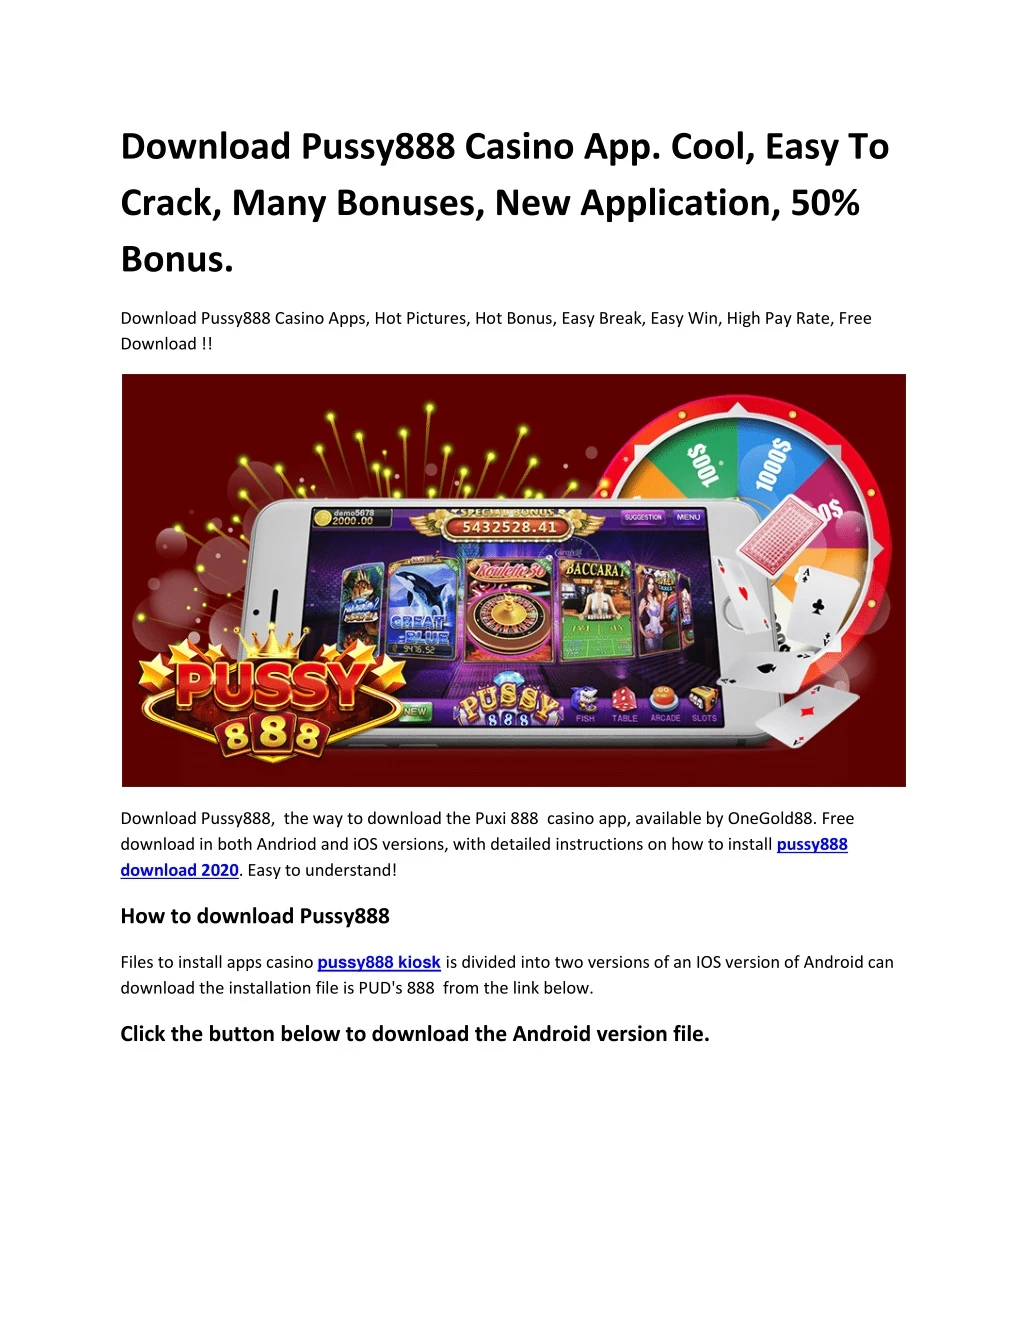 download pussy888 casino app cool easy to crack